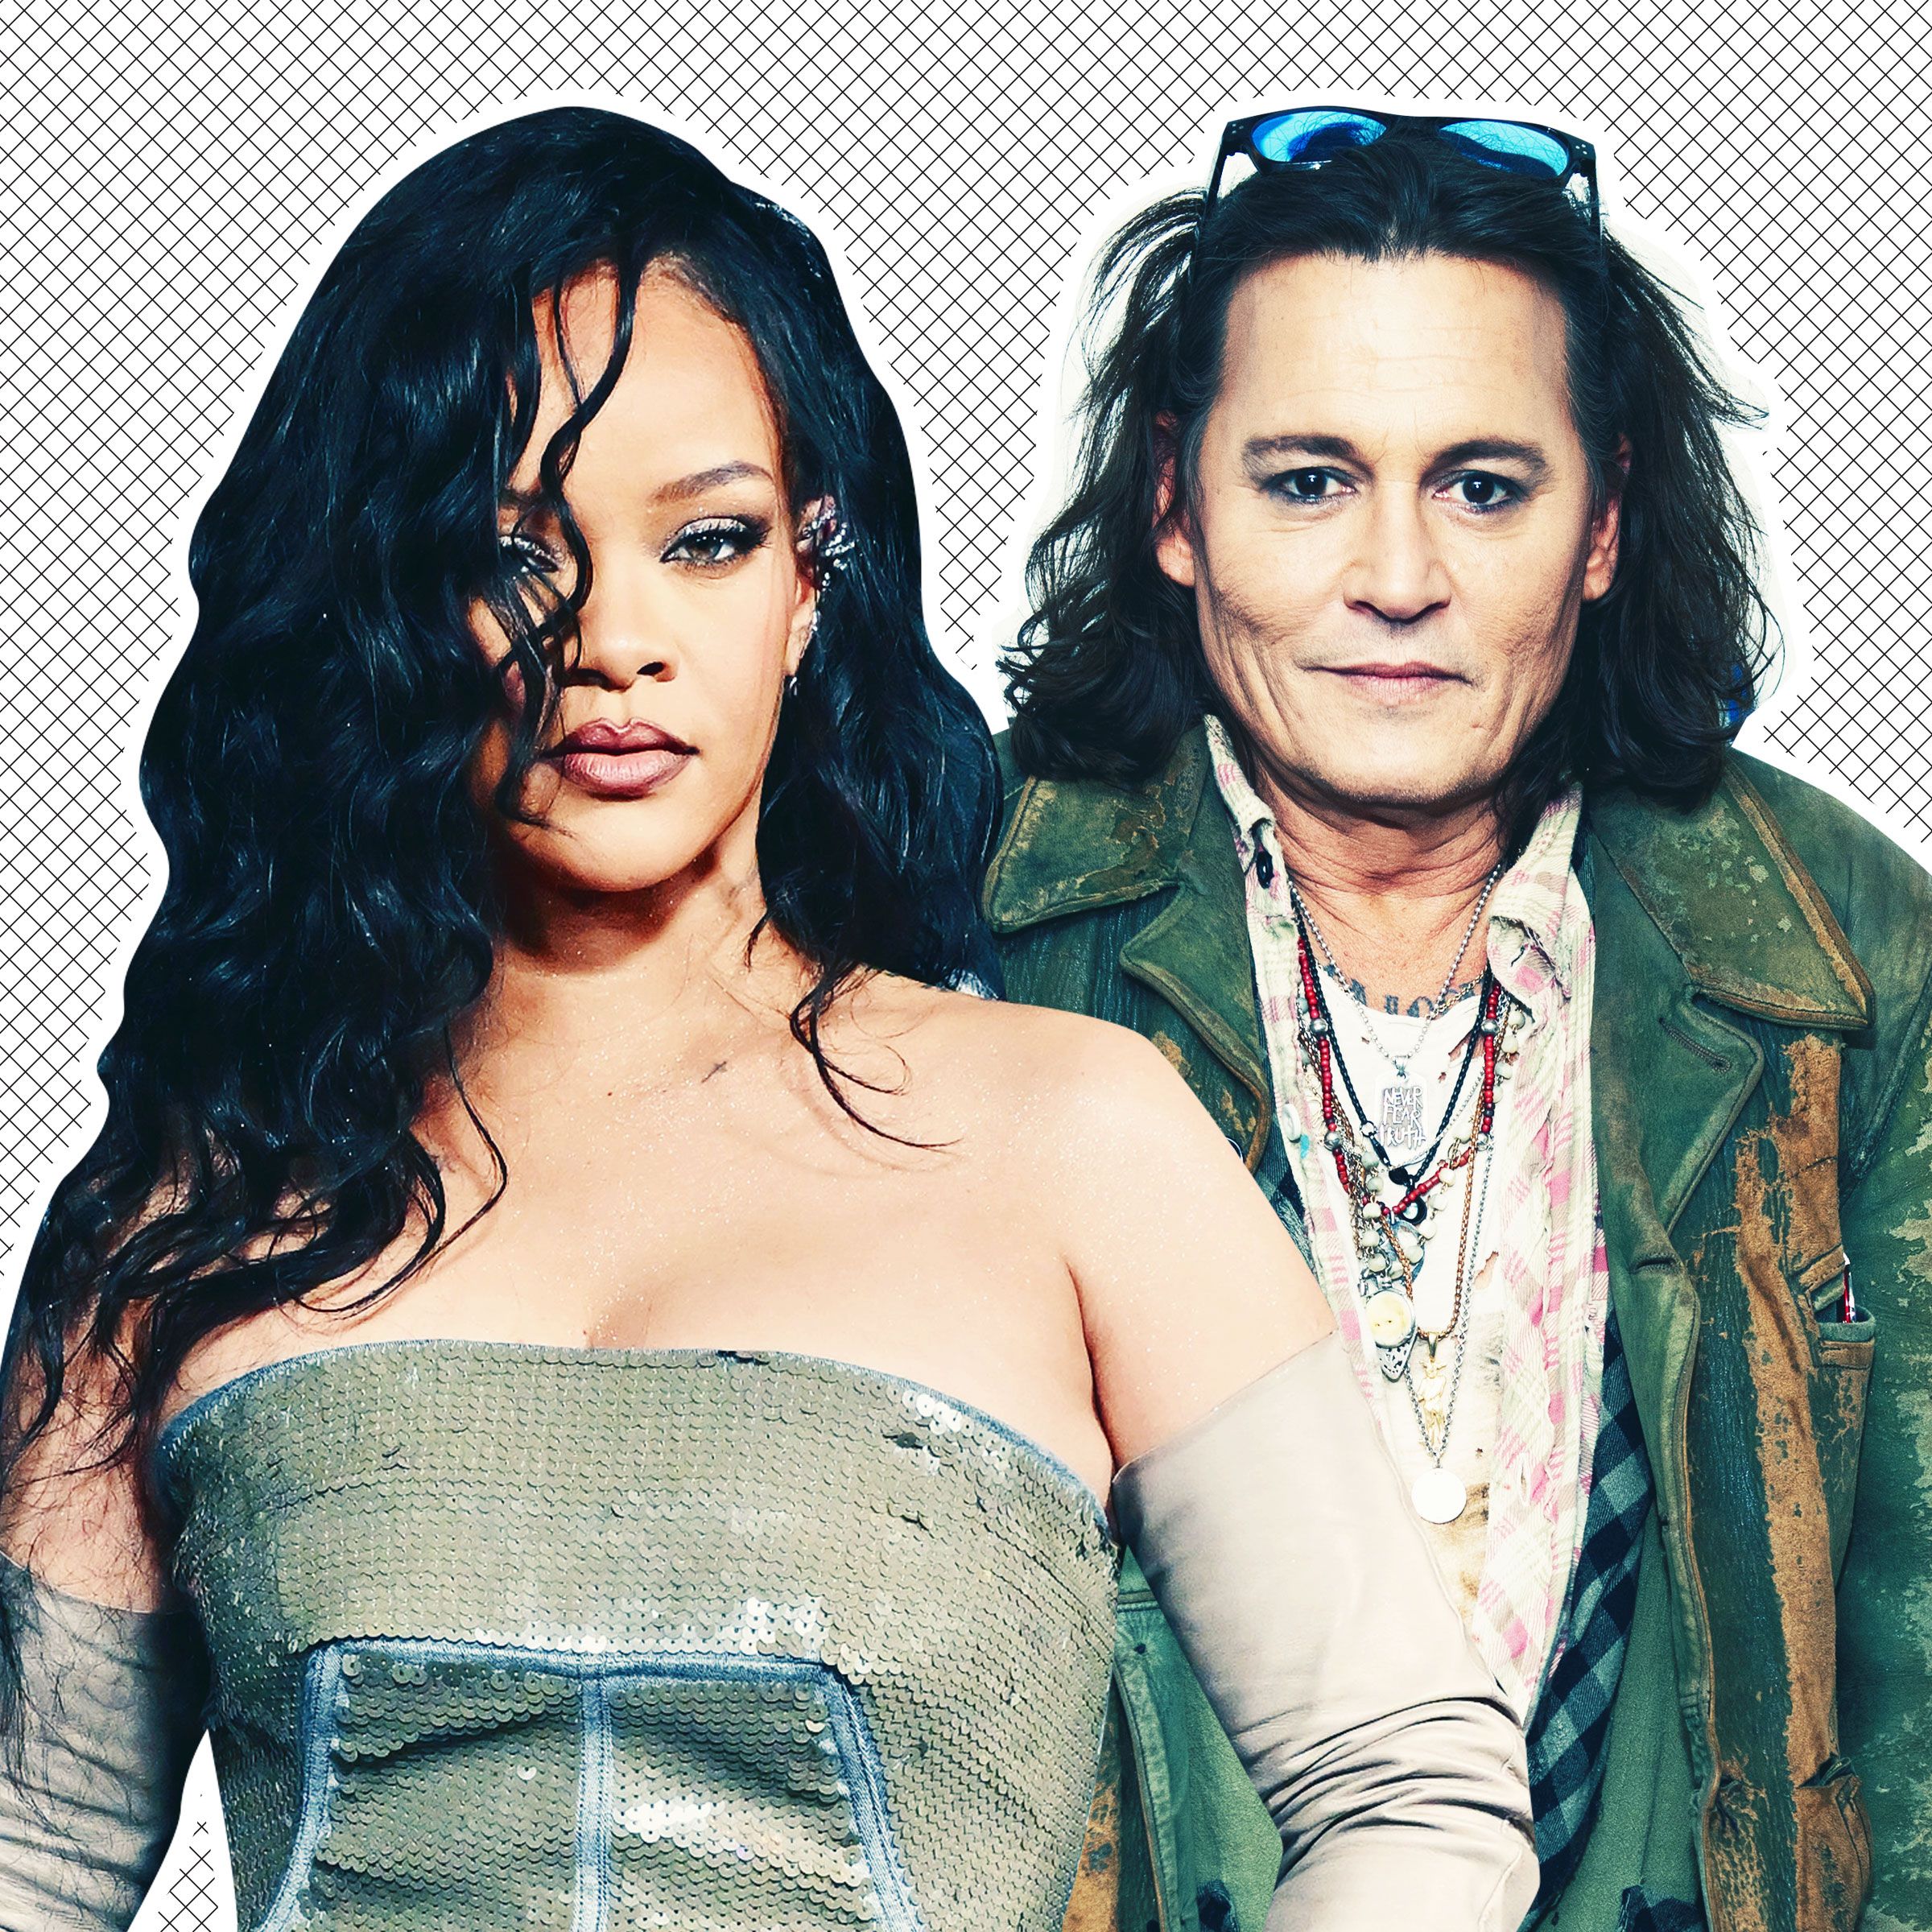 Rihanna to Give Johnny Depp Guest Slot at Fenty Show: Report